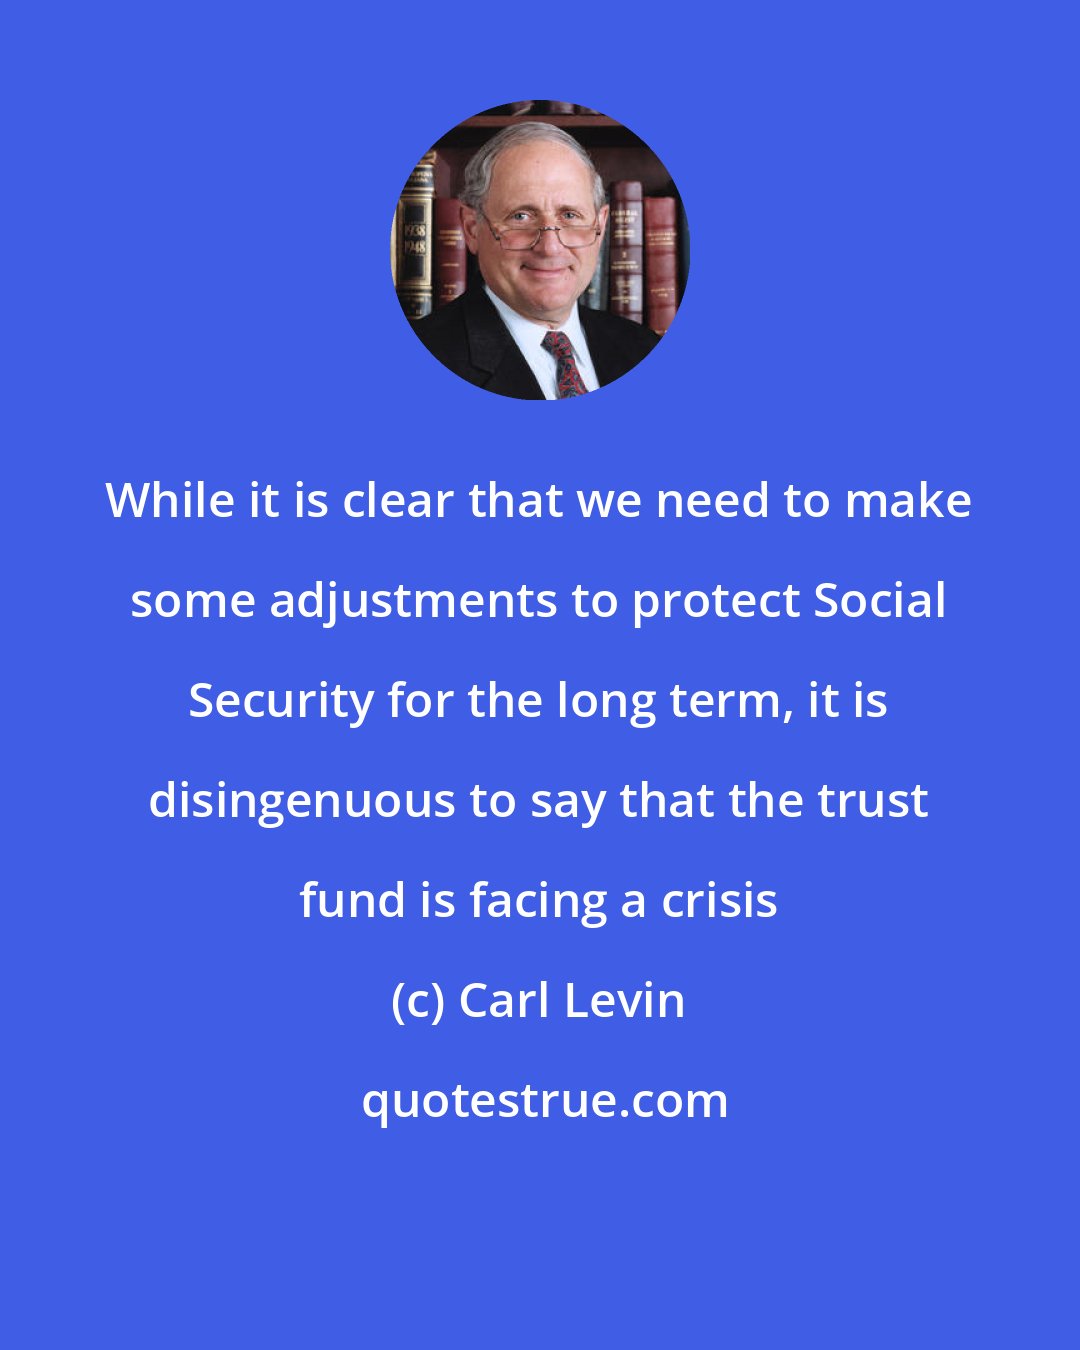 Carl Levin: While it is clear that we need to make some adjustments to protect Social Security for the long term, it is disingenuous to say that the trust fund is facing a crisis